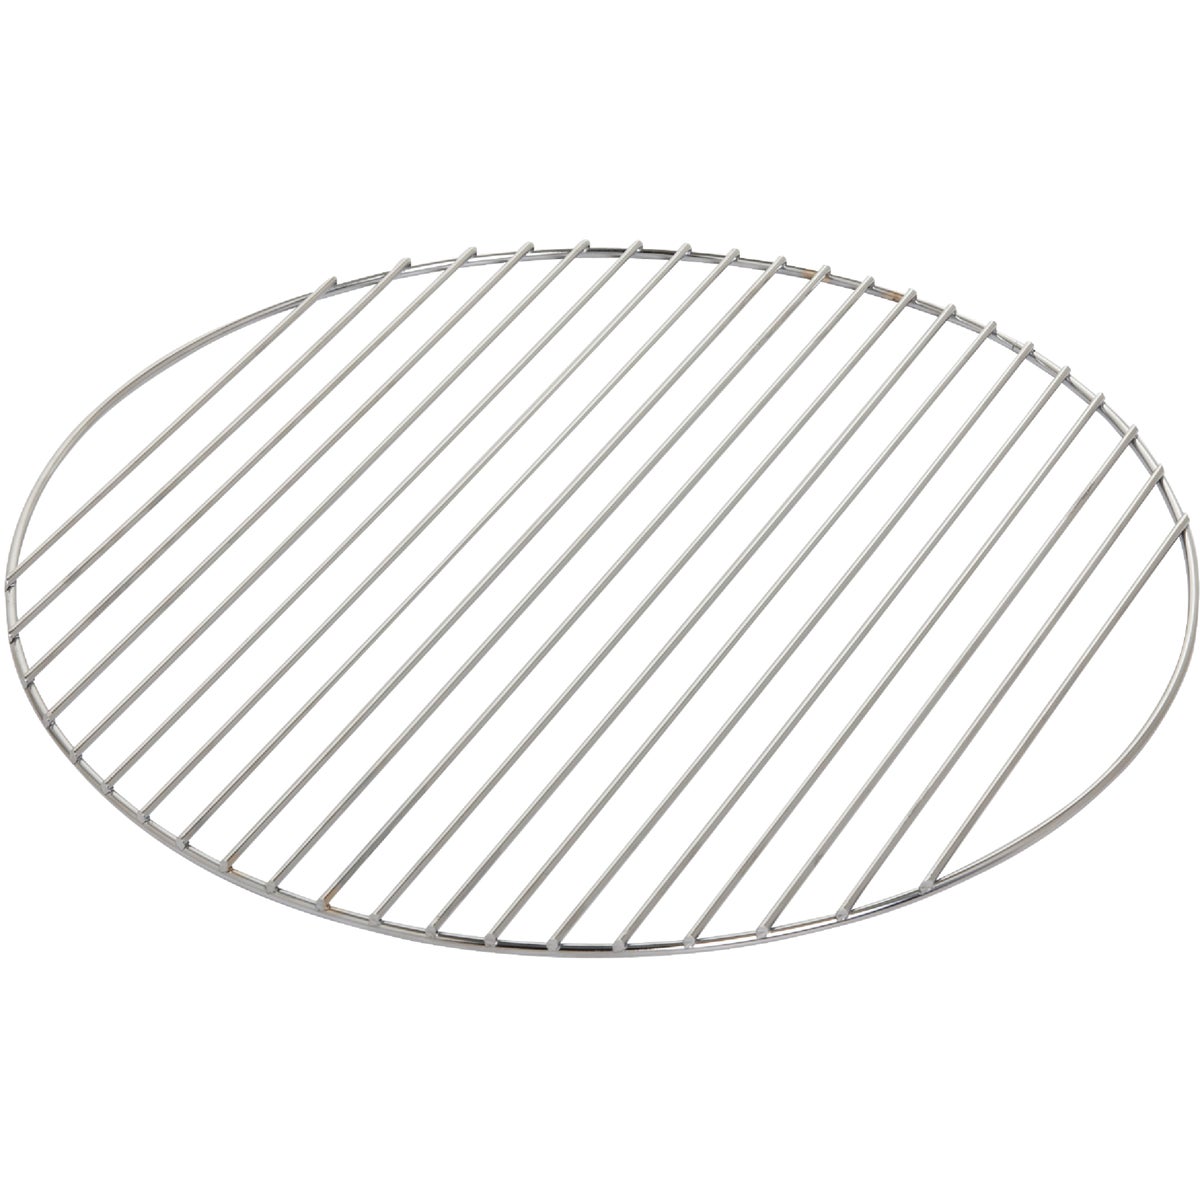 18″ TOP GRILL GRATE